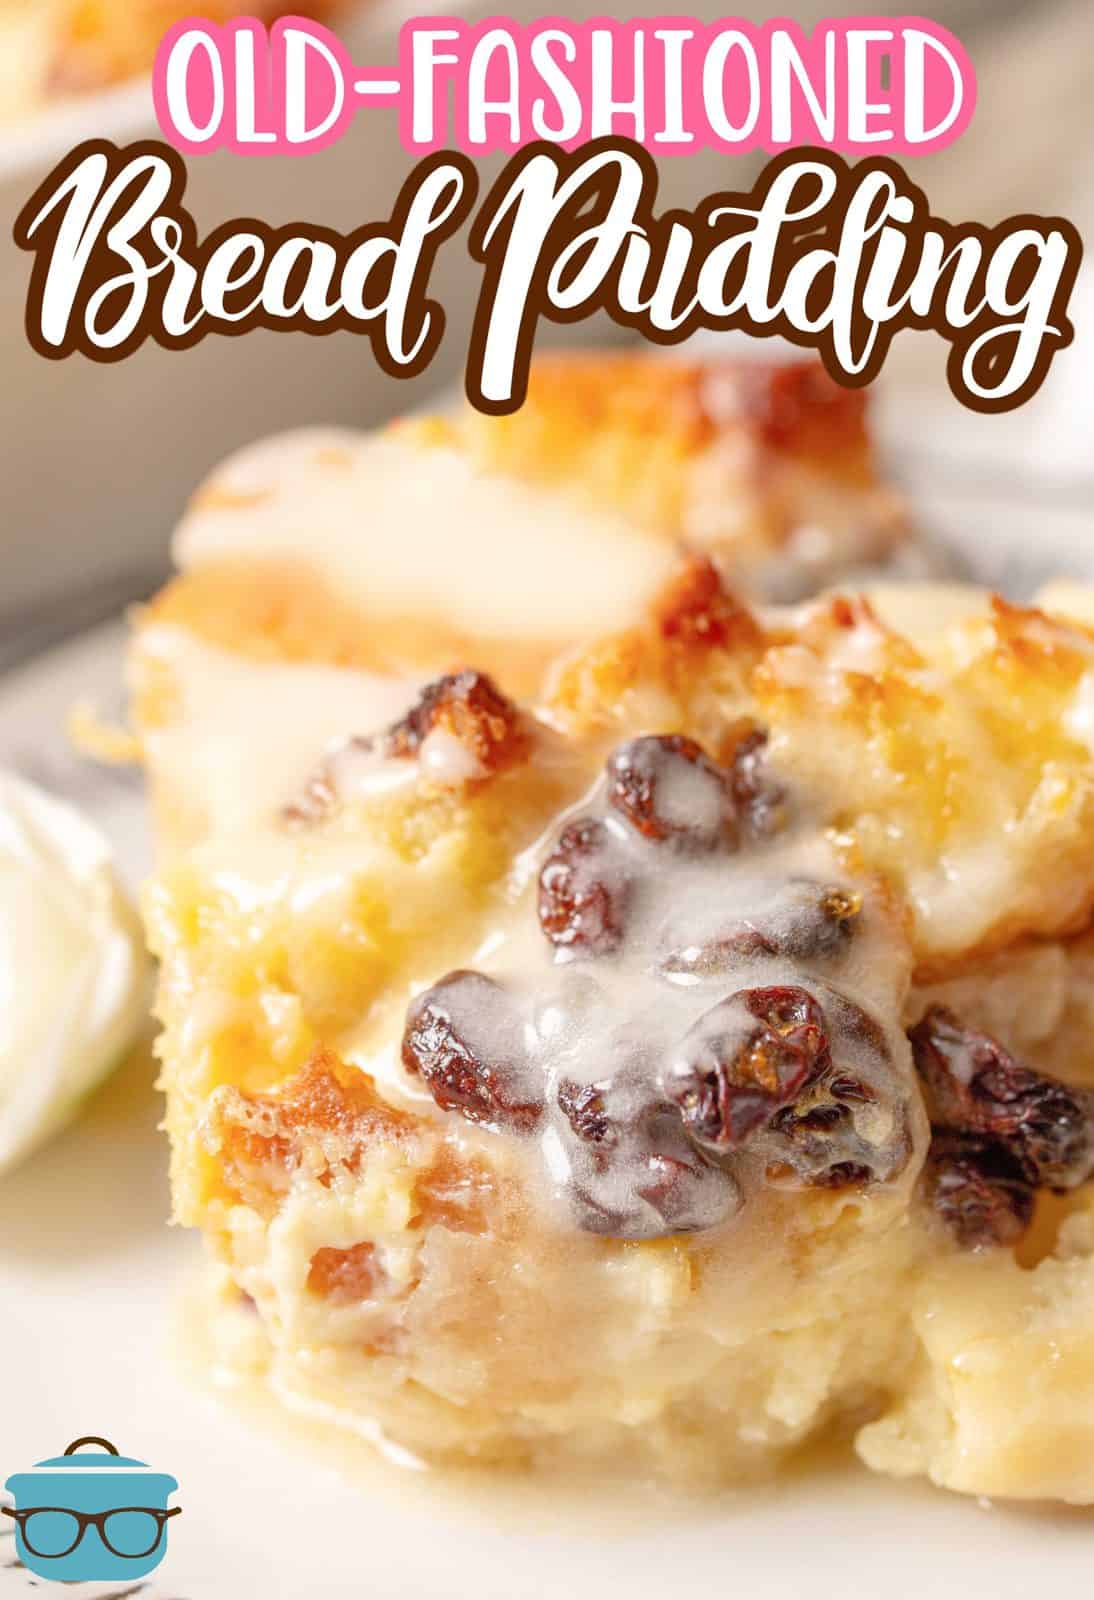 Pinterest image of slice of Old Fashioned Bread Pudding dripping with sauce and raisins.